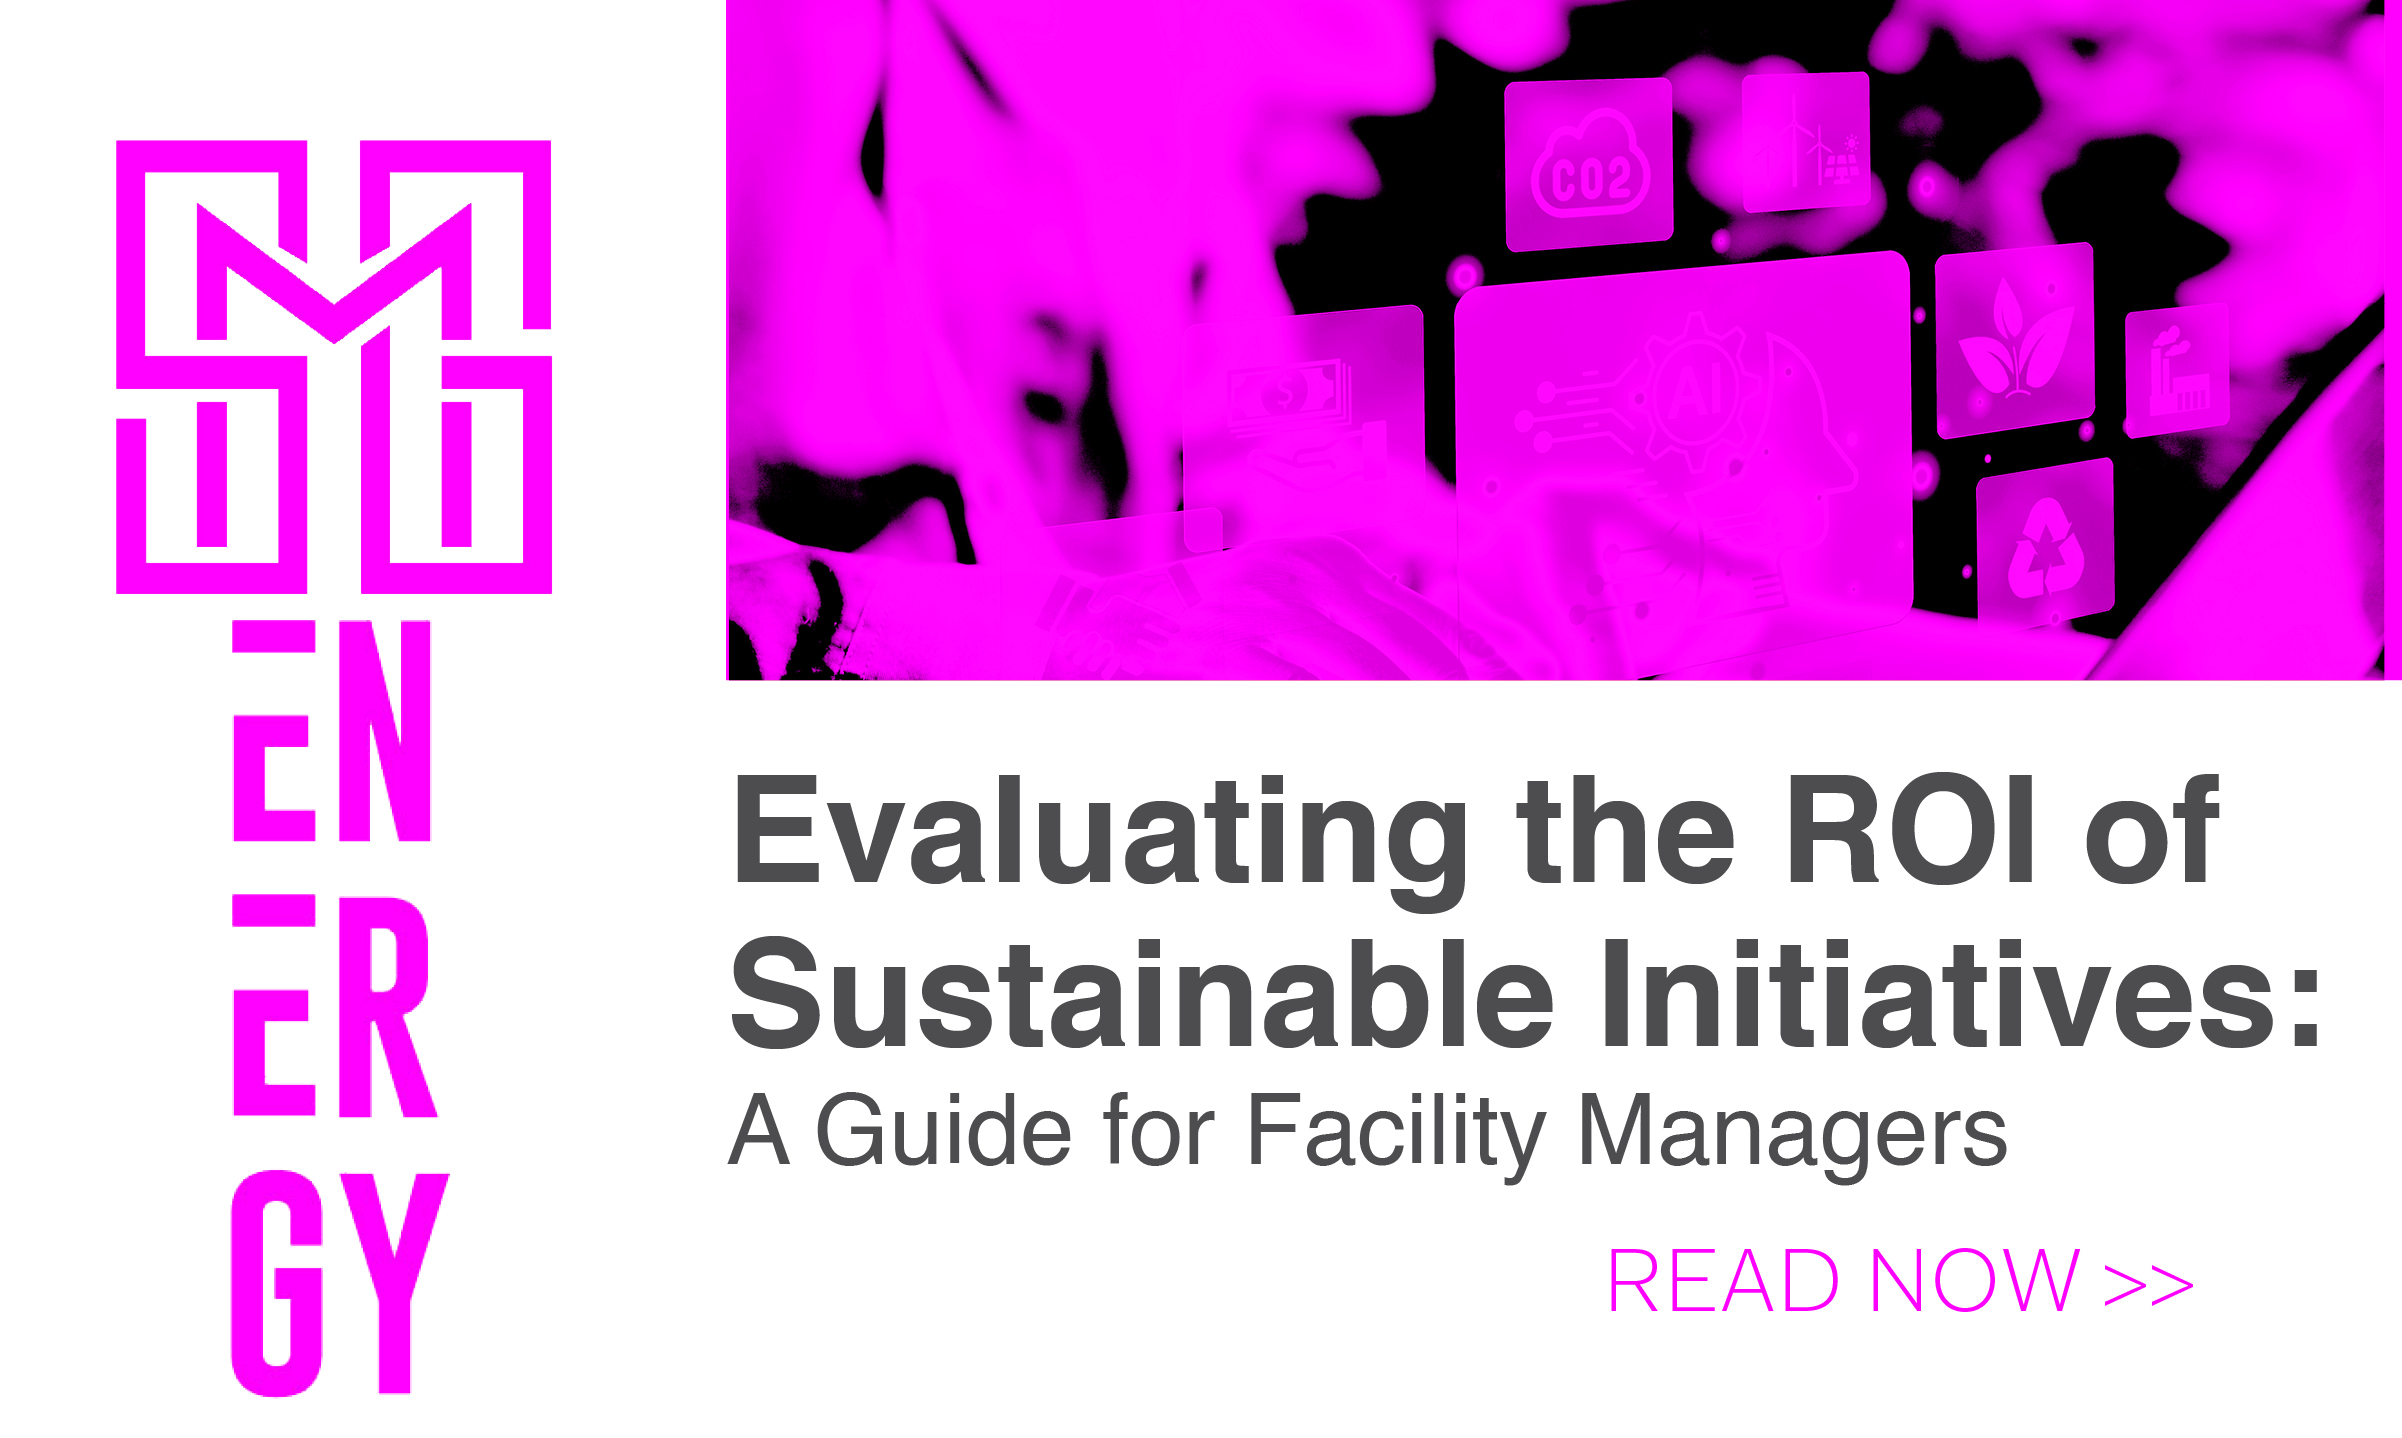 Evaluating the ROI of Sustainable Initiatives: A Guide for Facility Managers